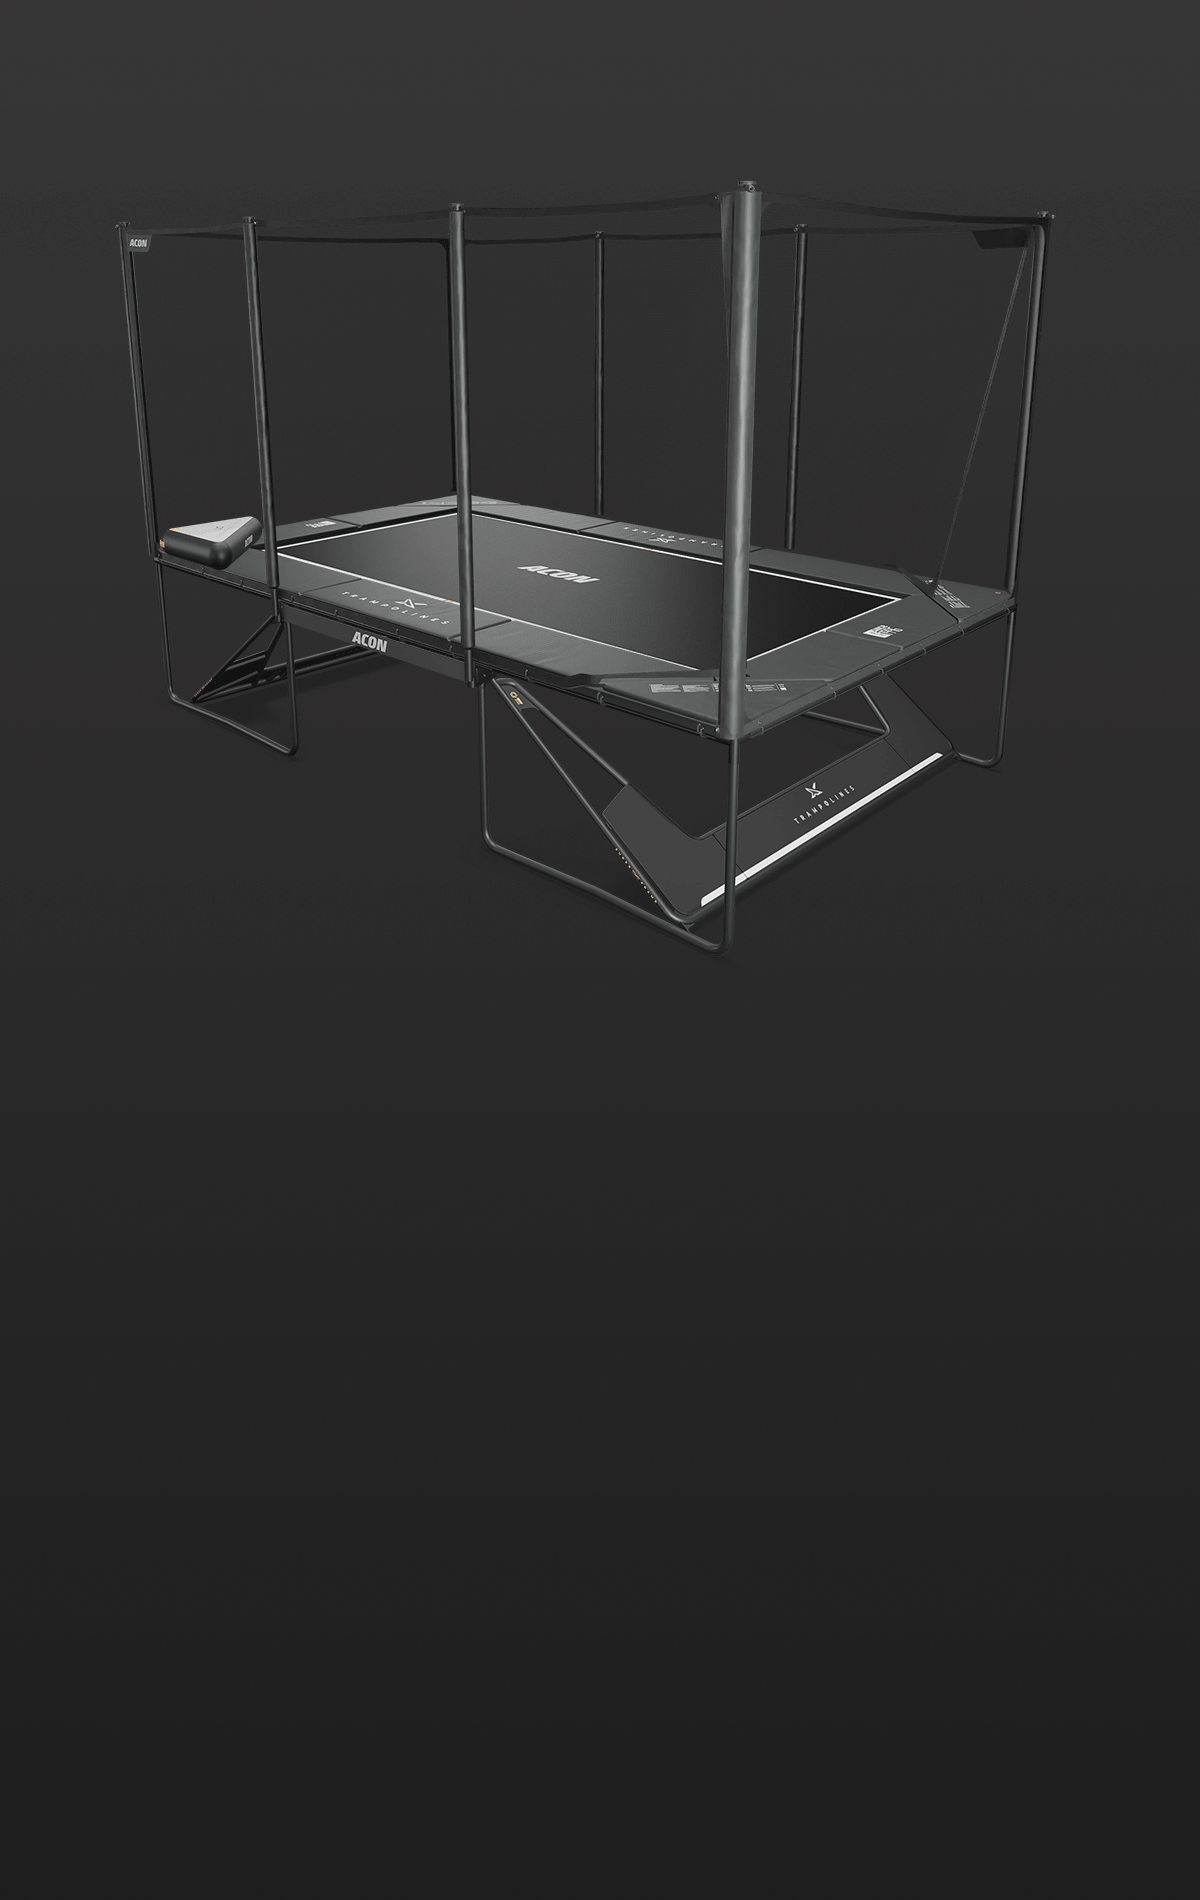 Animated picture of Acon X Trampoline and its accessories.